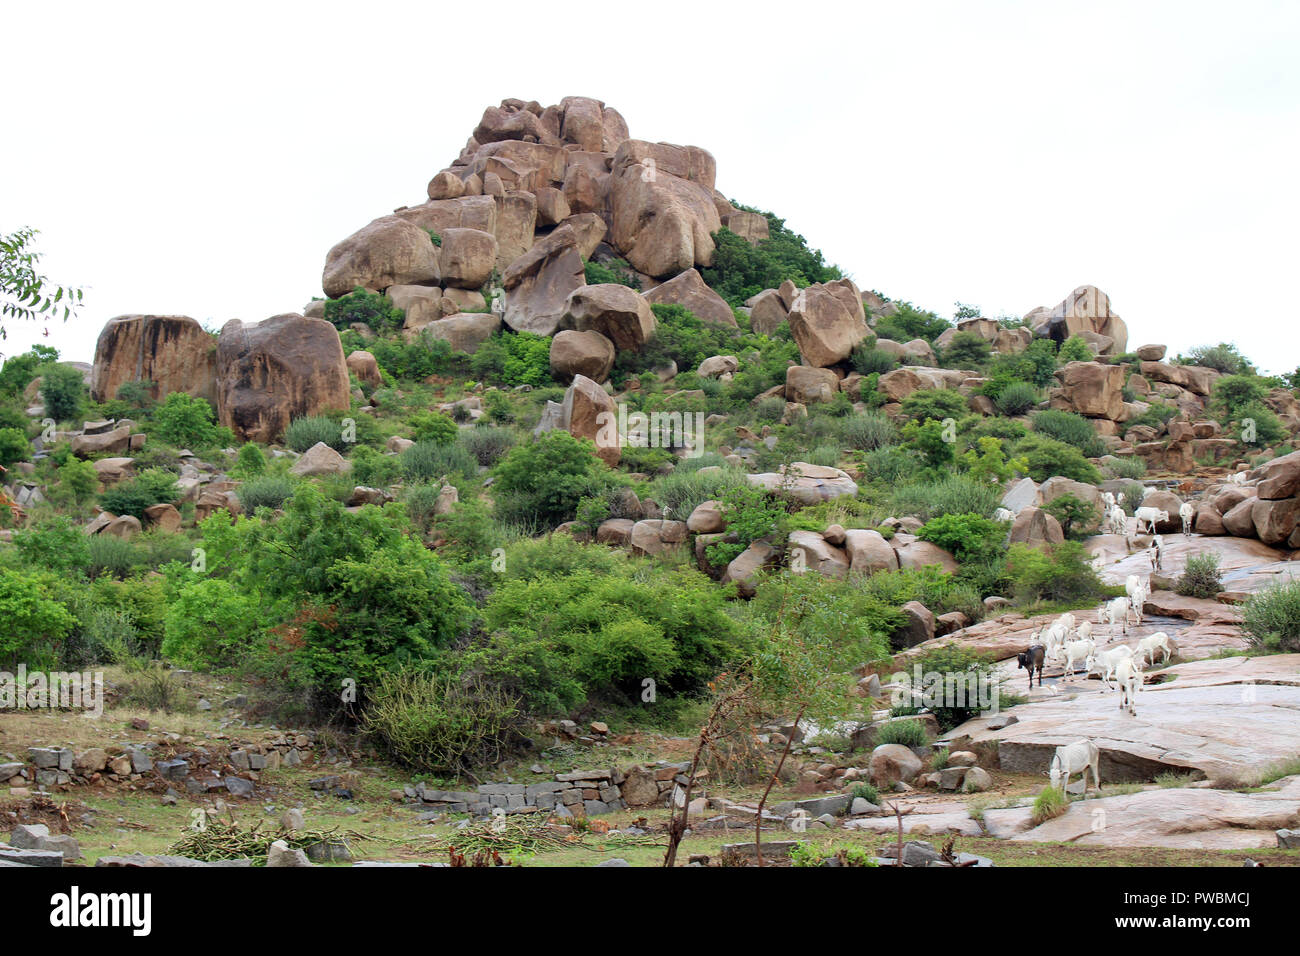 Sheeps roaming around the hill of Hampi, (probably) unguided. Taken in India, August 2018. Stock Photo